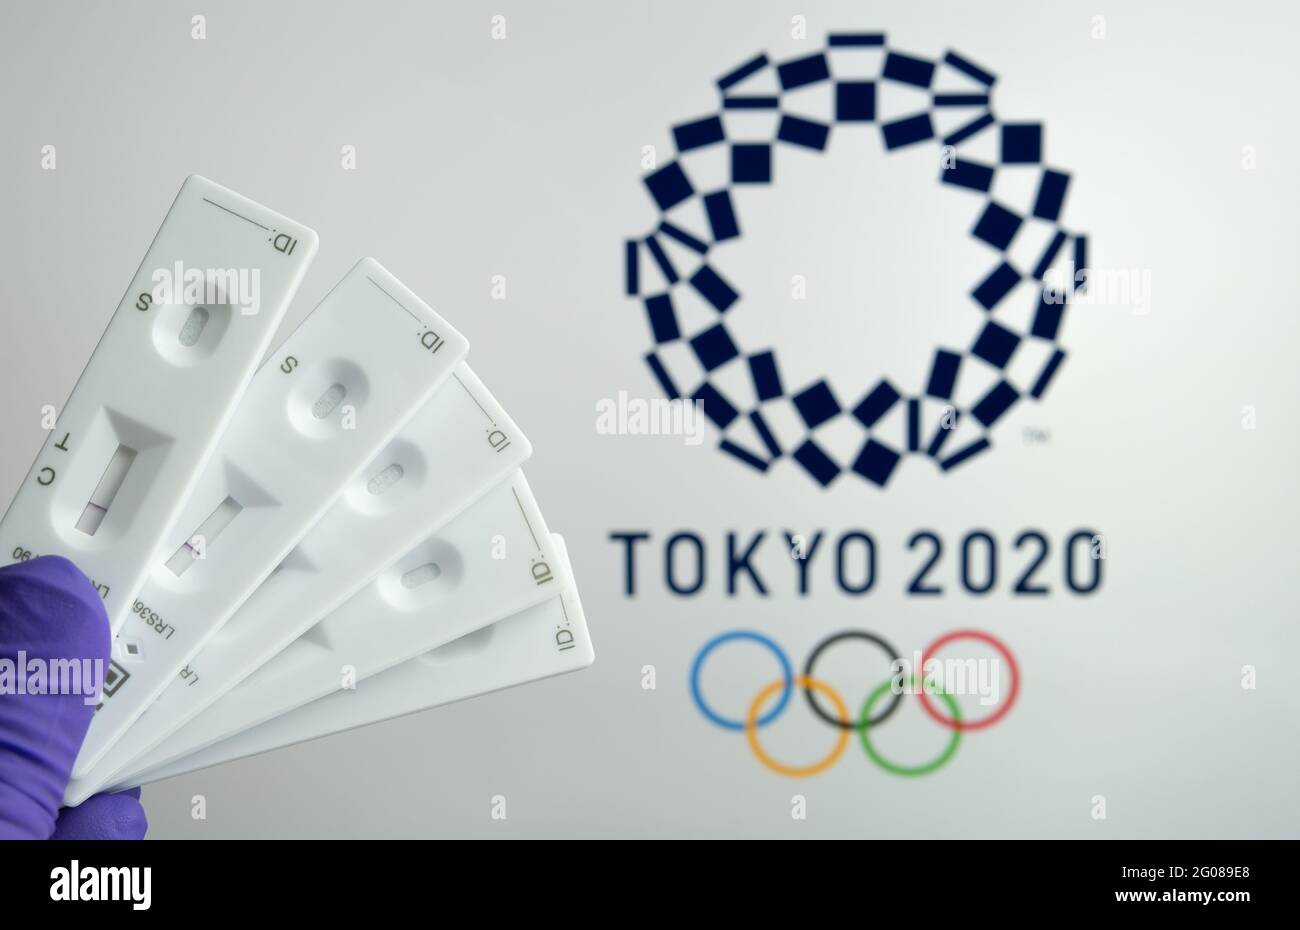 Negative PCR tests in front and blurred Tokyo 2020 logo on the blurred background. Concept for Tokyo COVID Olympic games in 2021. Stafford, United Kin Stock Photo